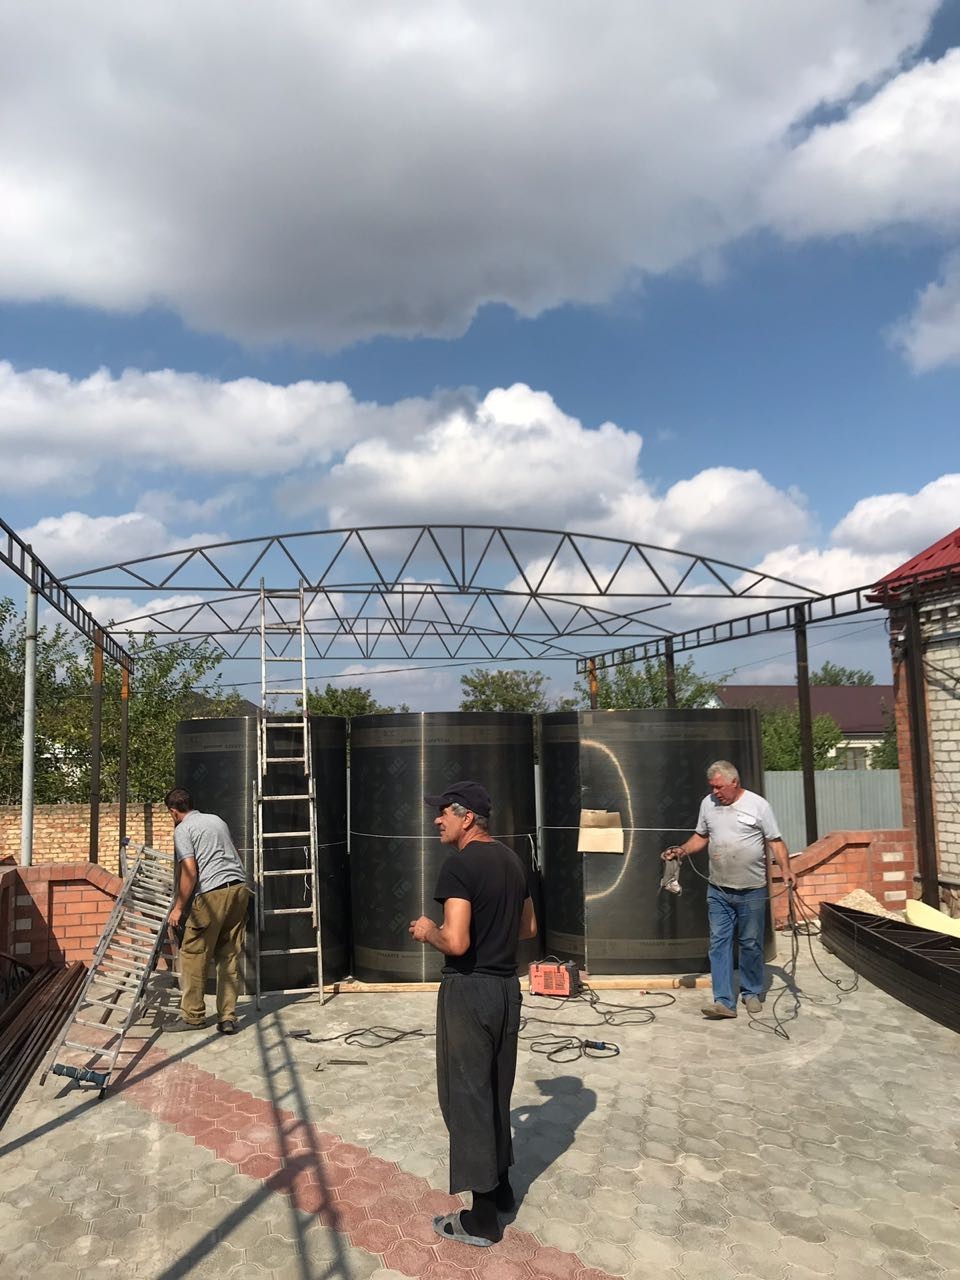 Do-it-yourself arched canopy. - My, Longpost, Welding, Shed, With your own hands, Welder